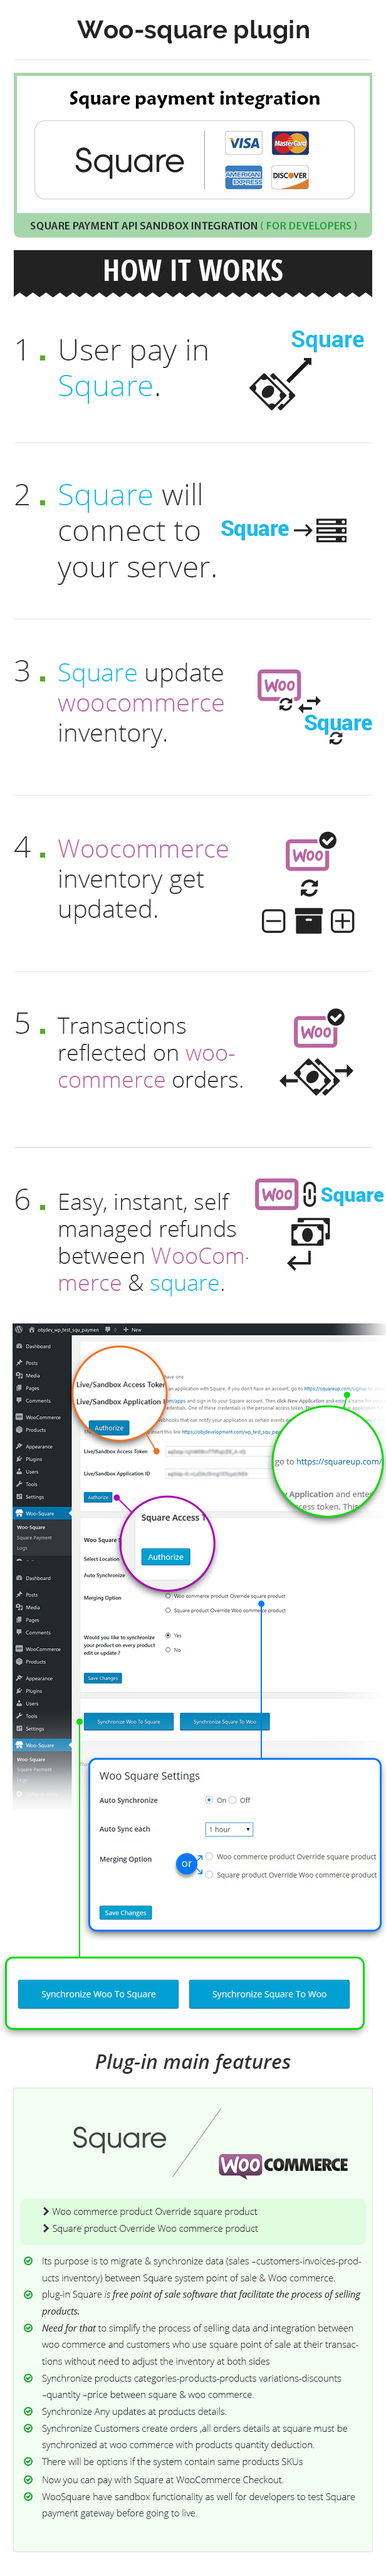 WooSquare Pro - Square For WooCommerce - 7